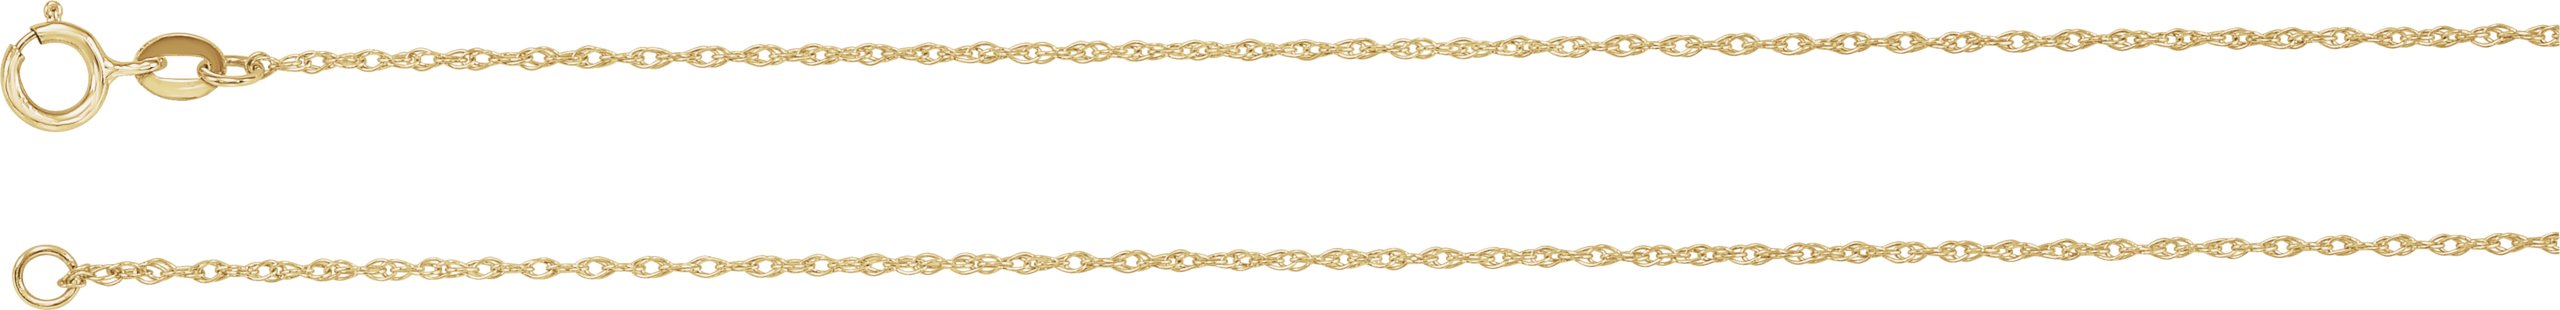 Solid Rope Chain 1.0mm Wide Ref 960371